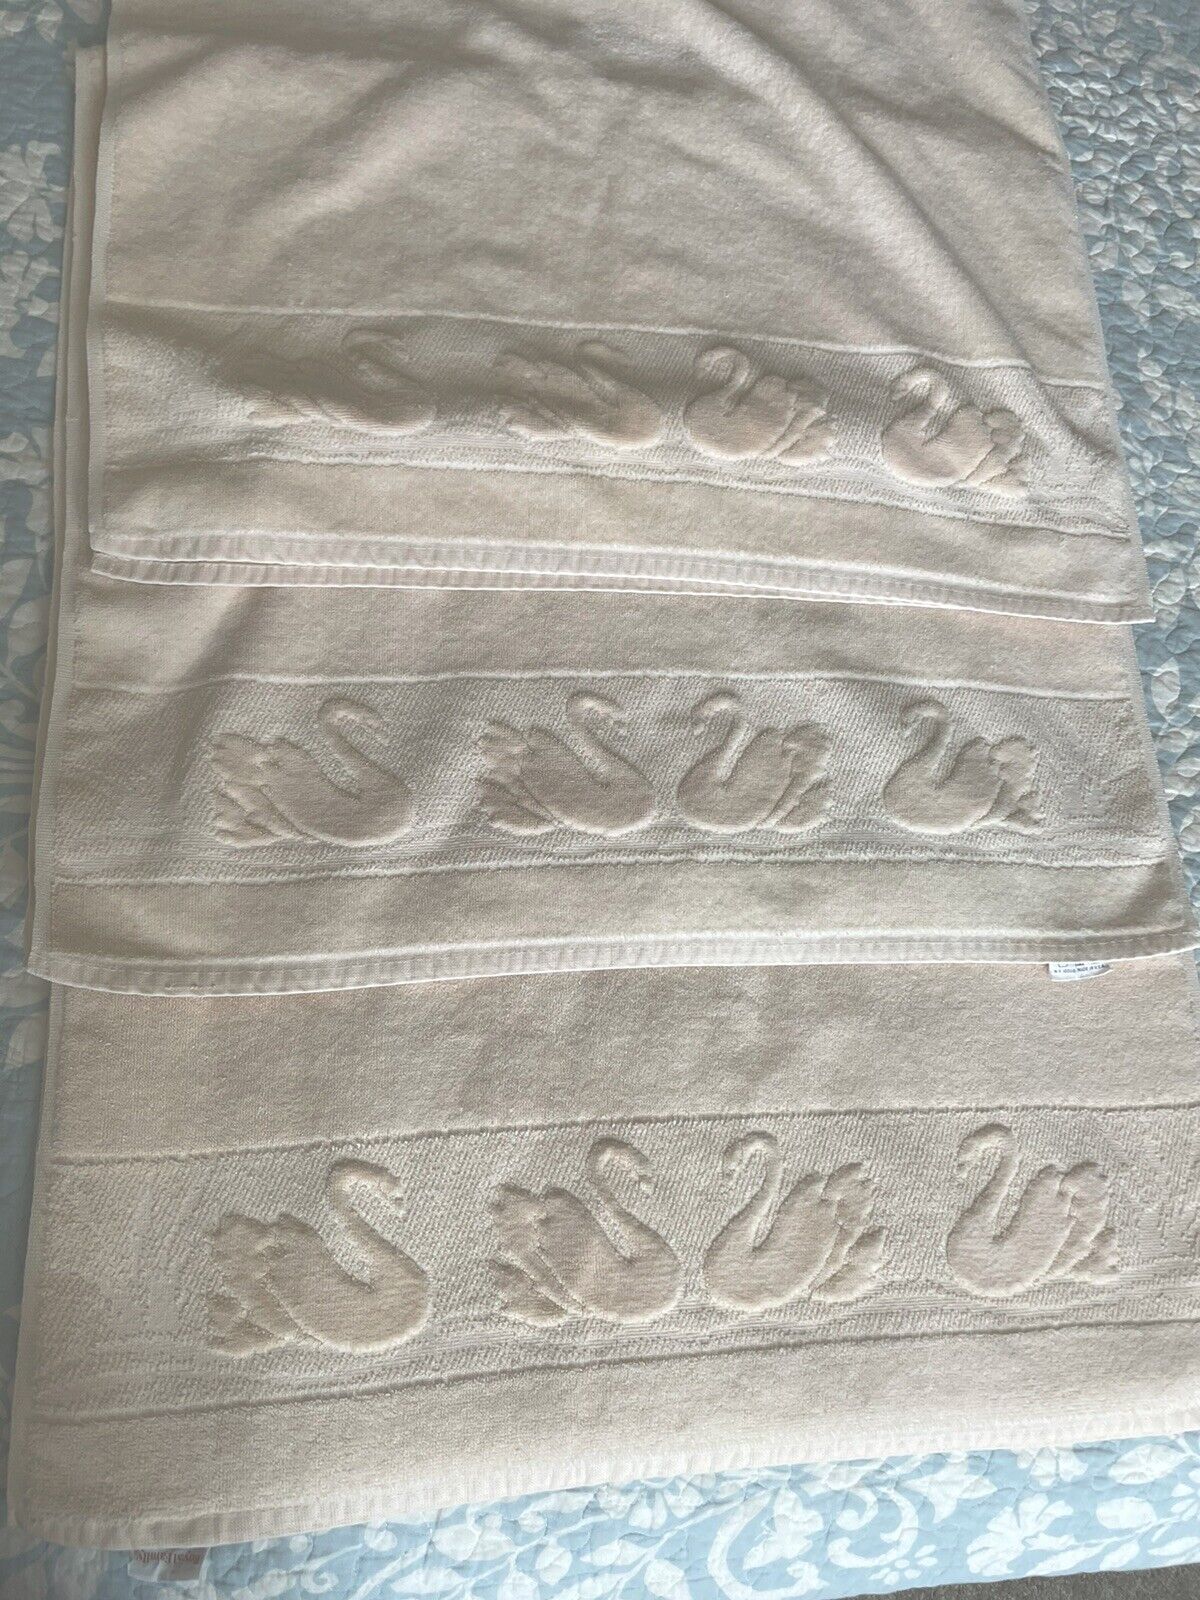 Lot of 3 Vintage Cannon Royal Family Bath Towels with Sculptured Swans Beige